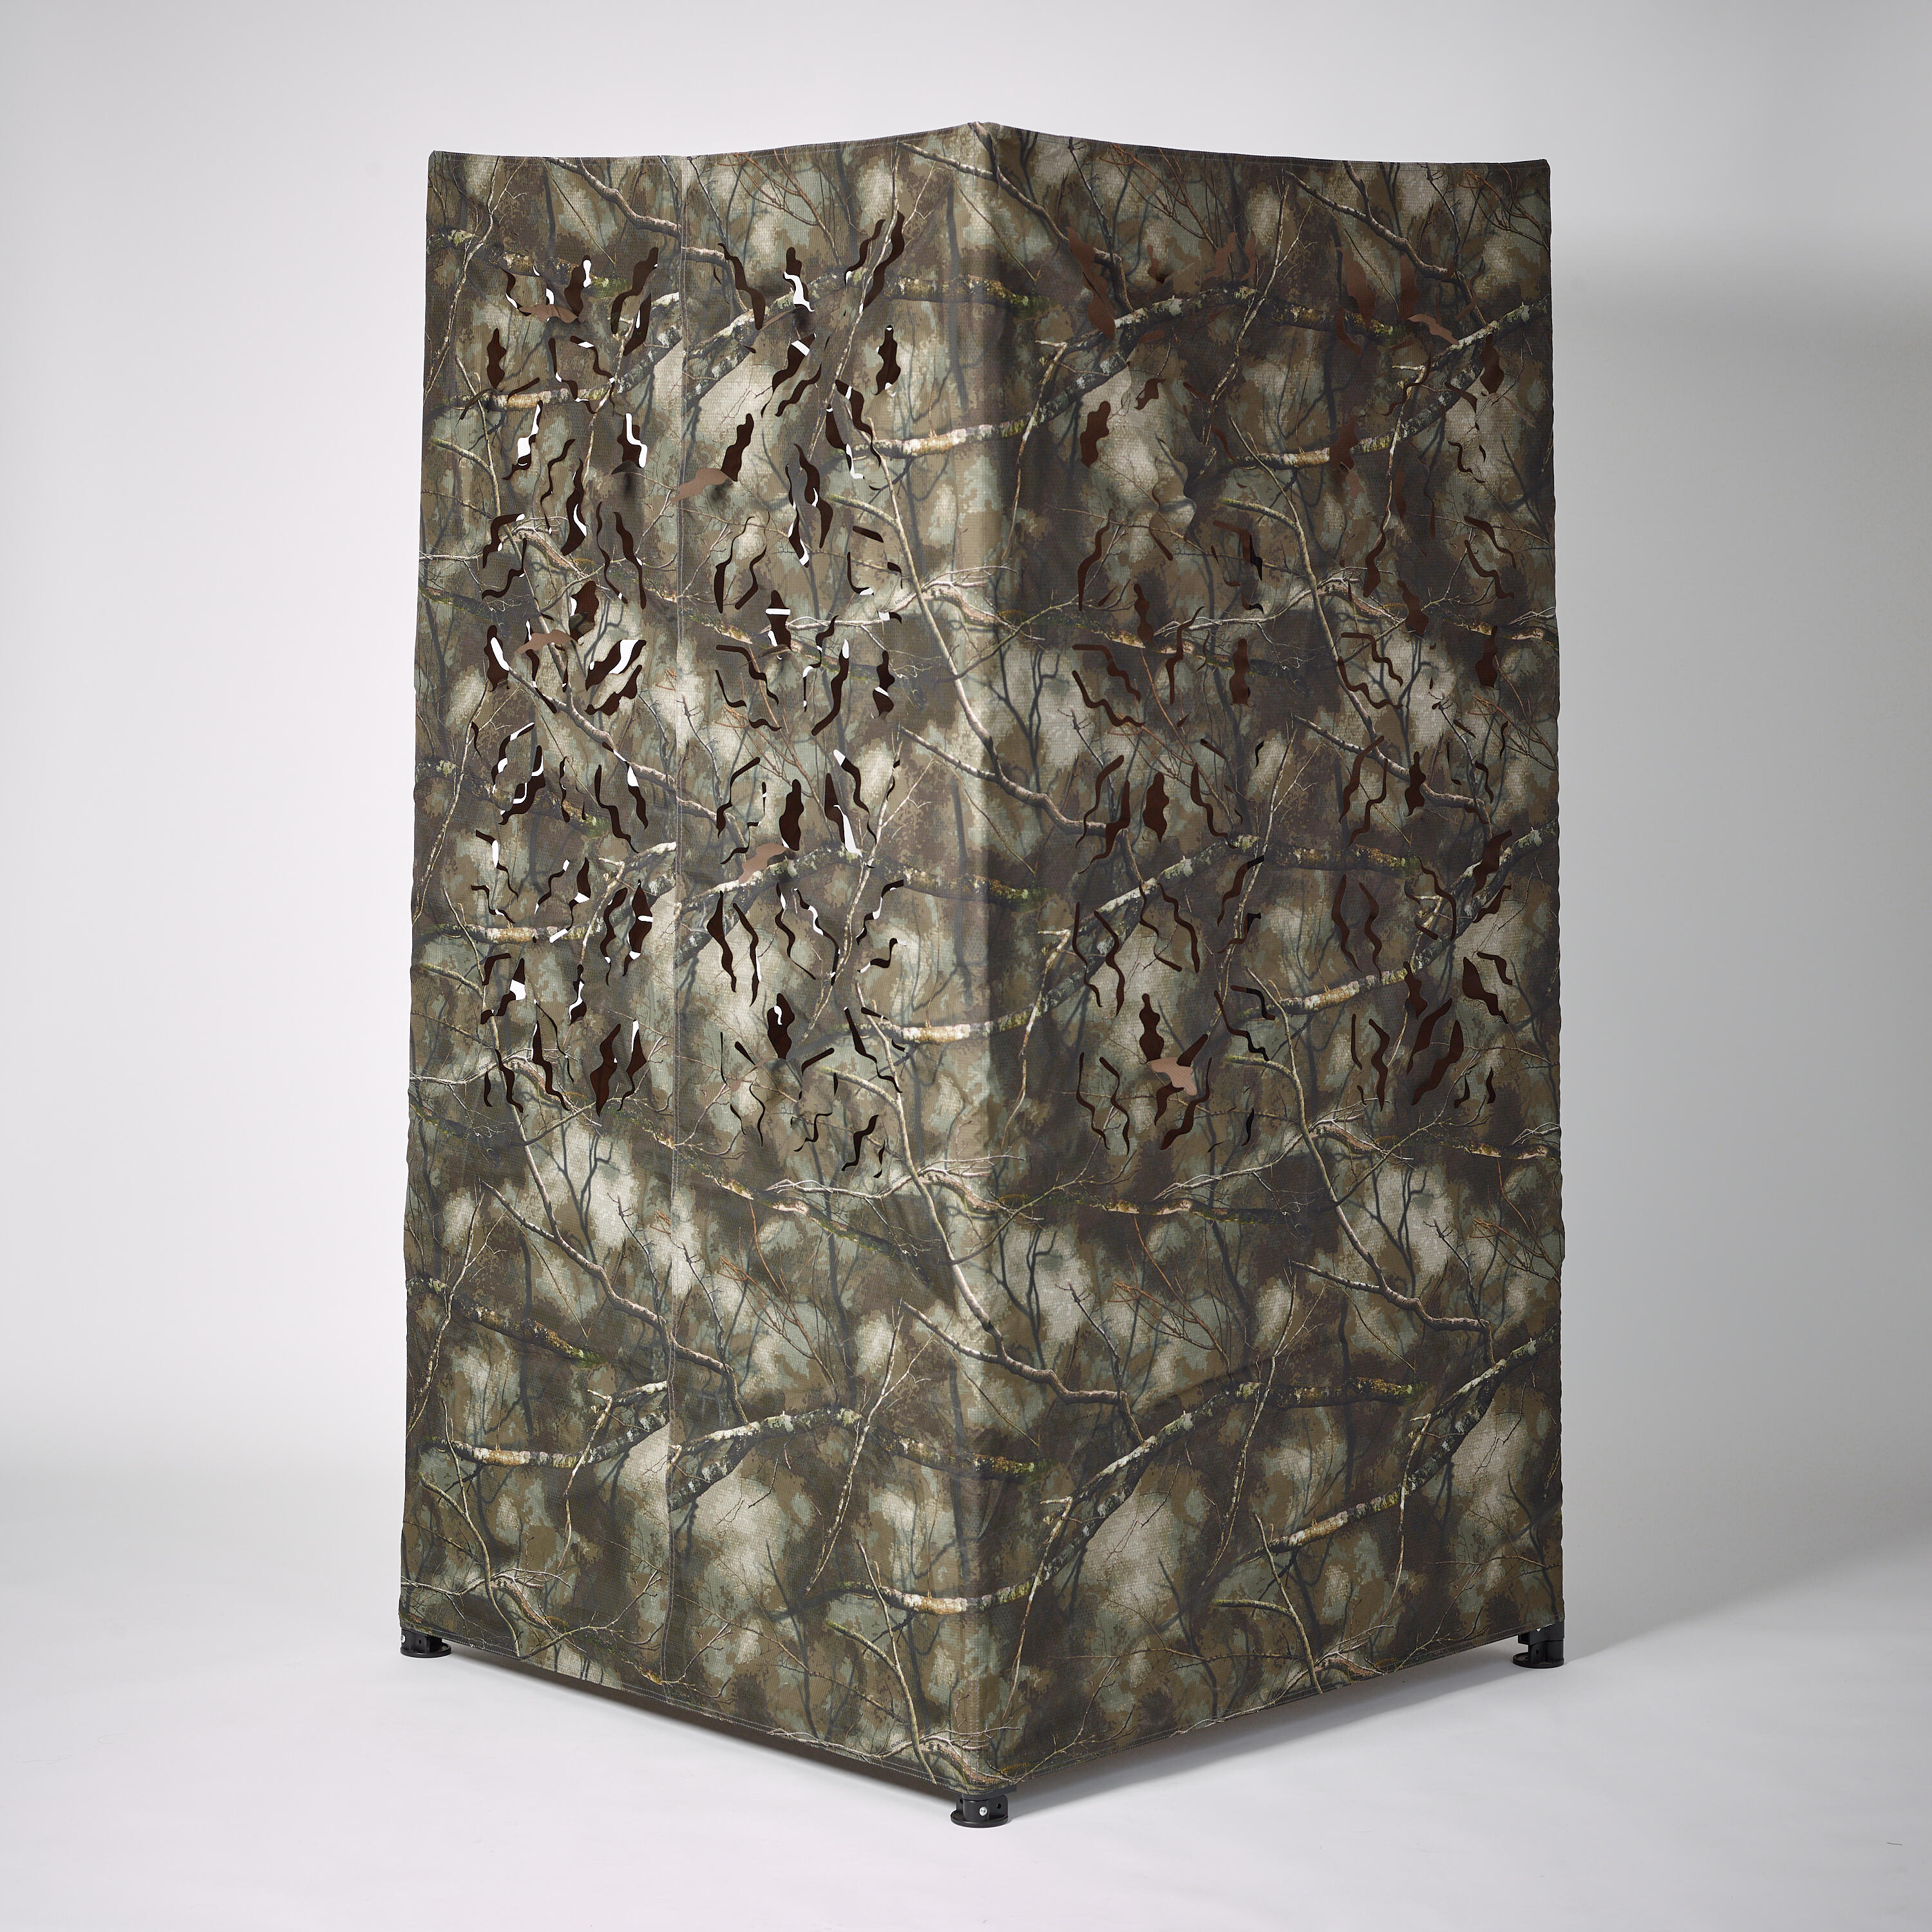 Hunting square hide 3D camouflage Treemetic 2/8